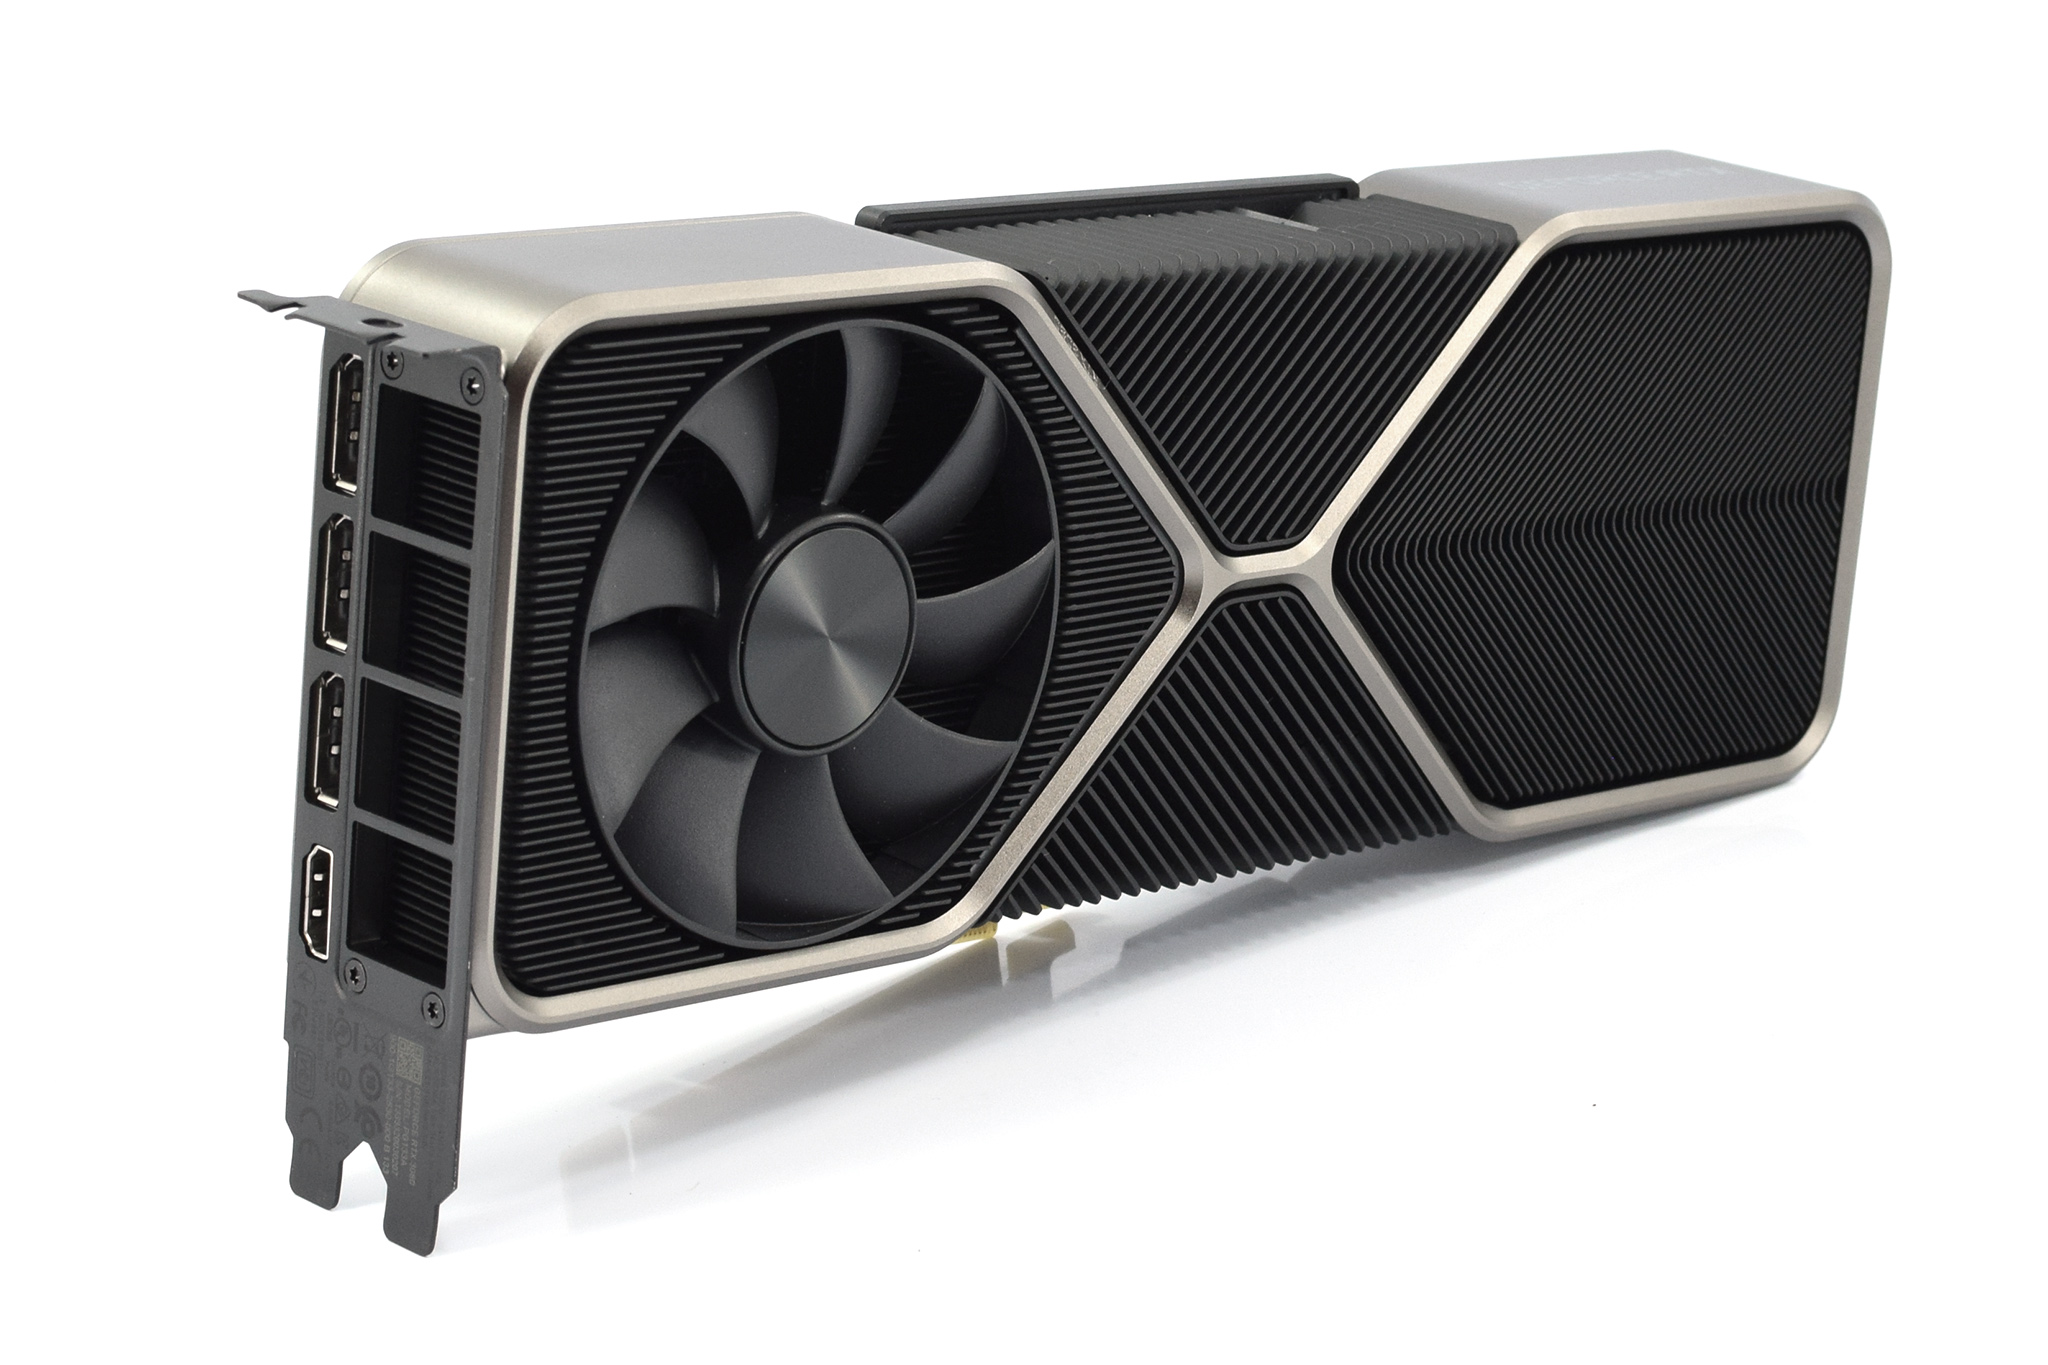 Nvidia GeForce RTX 3080 Founders Edition review